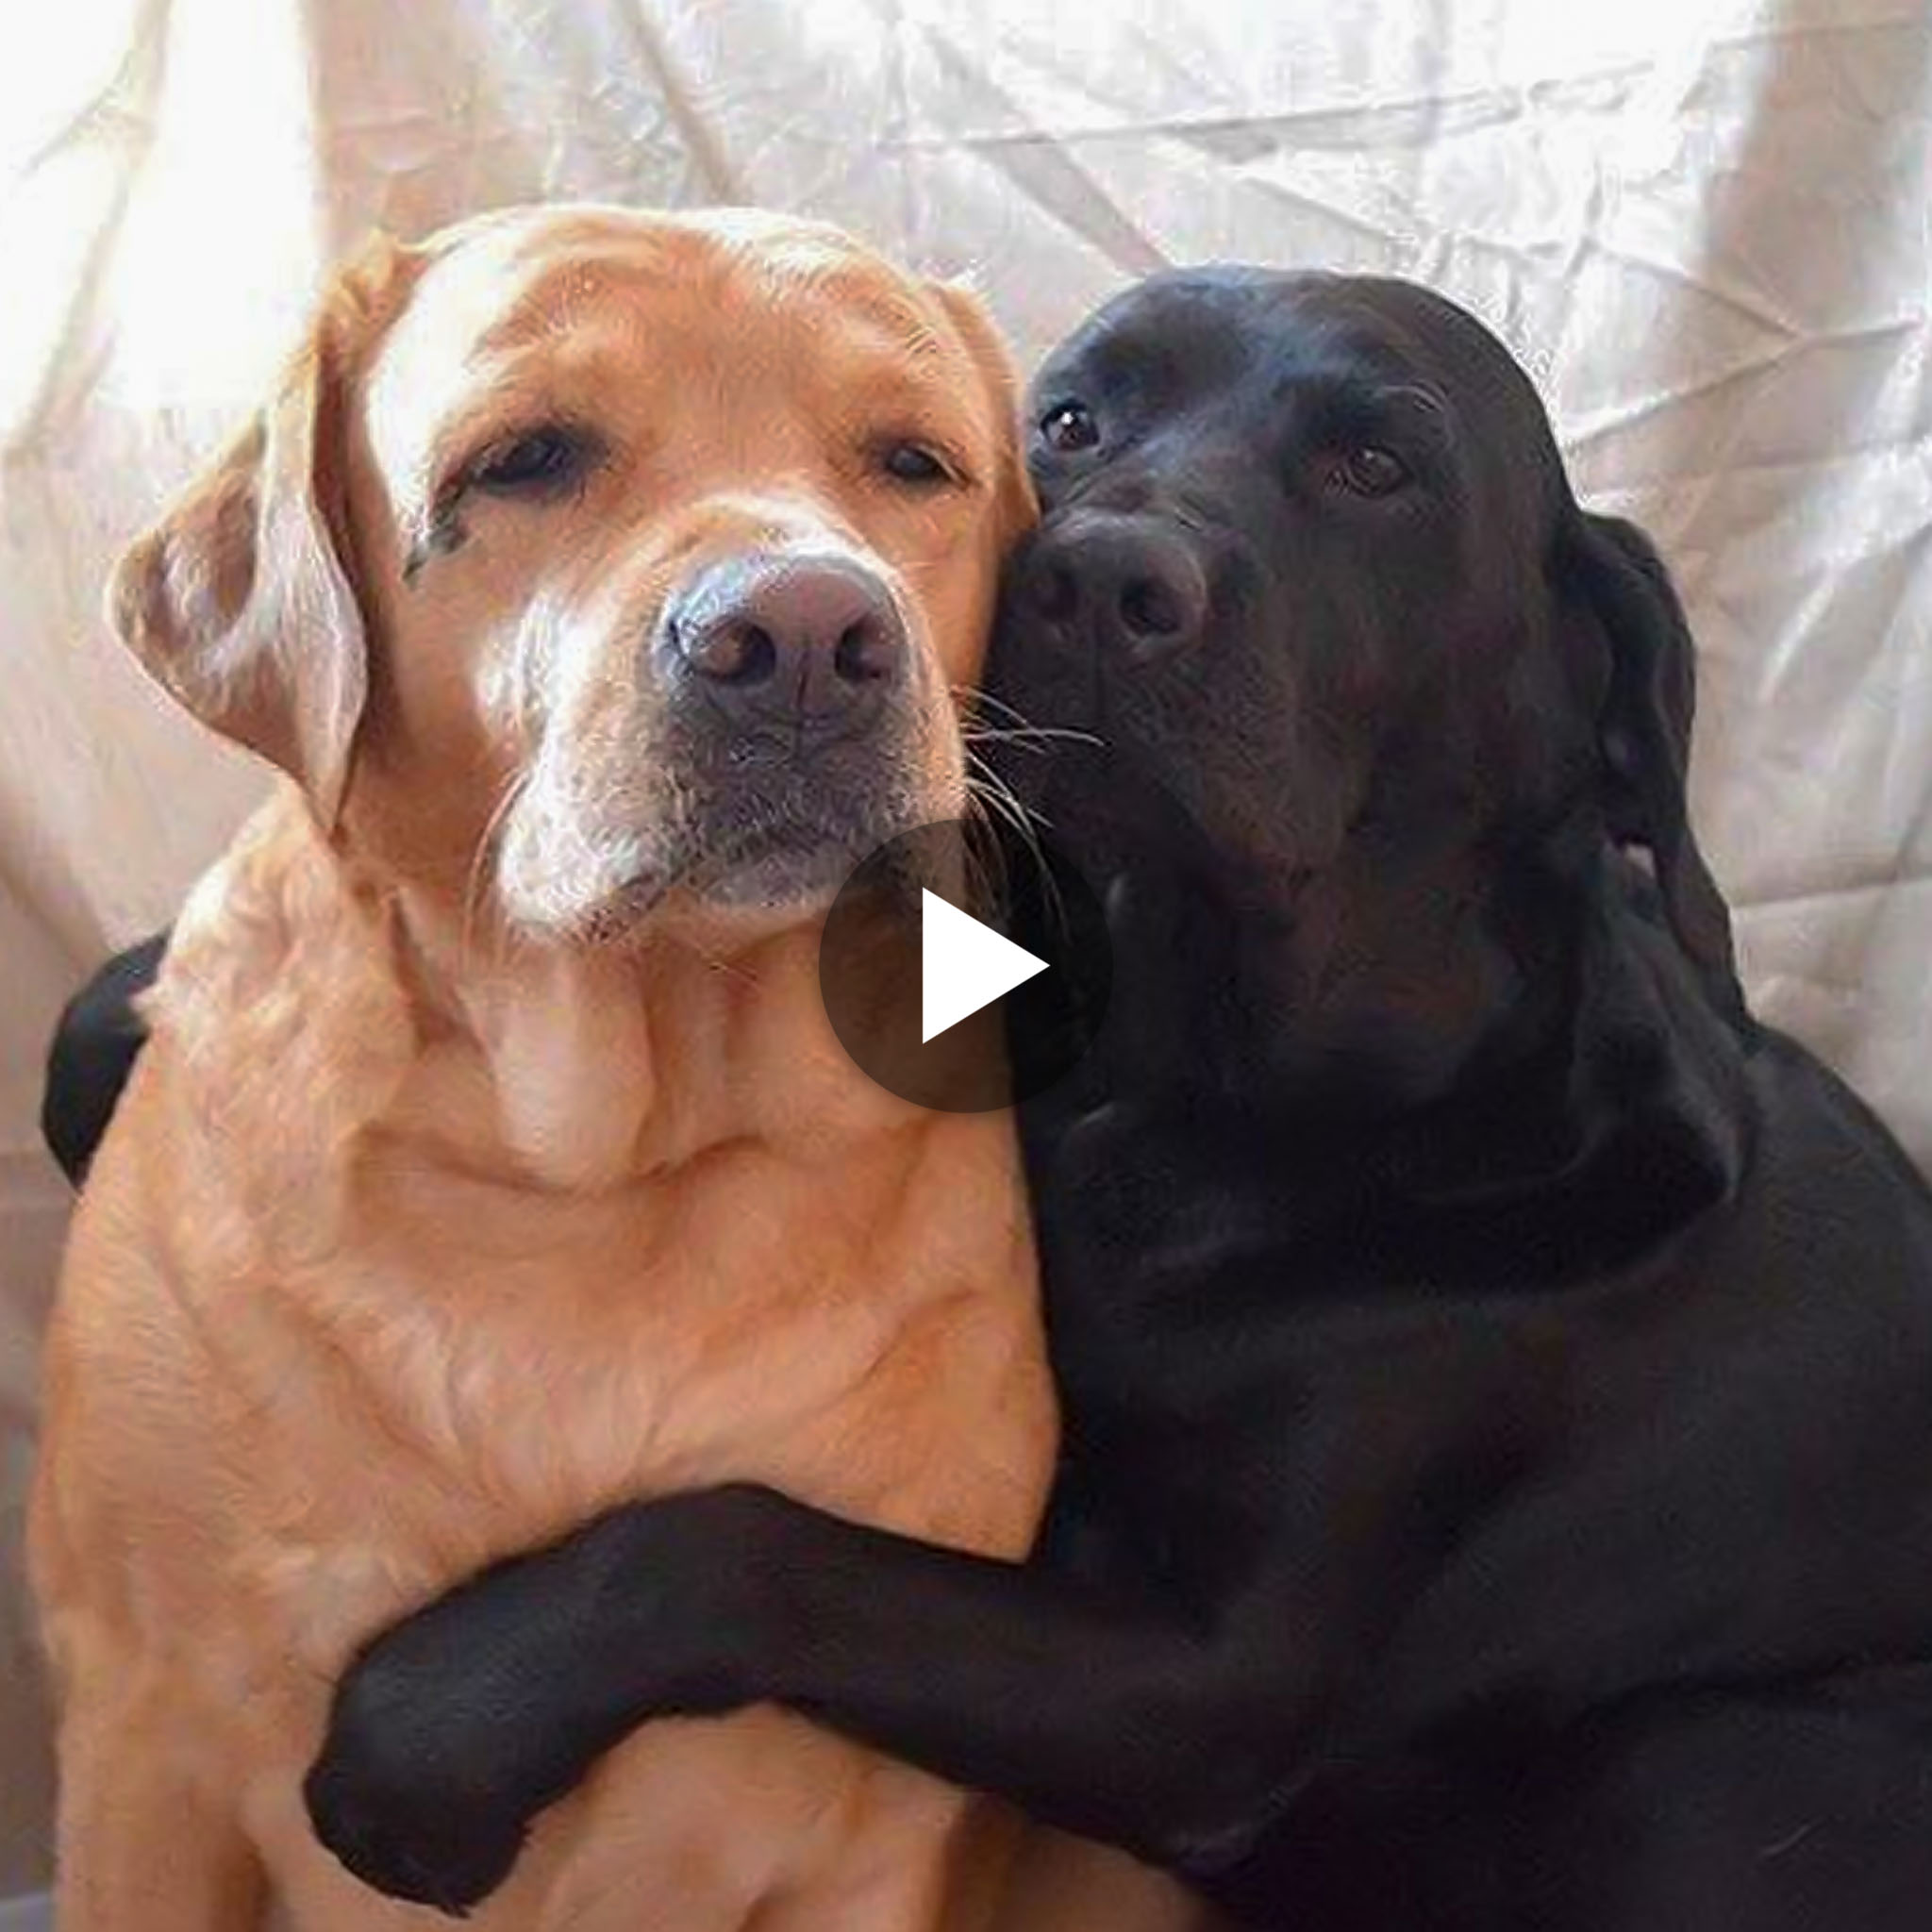 “Stray Dogs’ Heartwarming Reunion After 8 Months Apart: A Touching Tale of Love and Resilience”